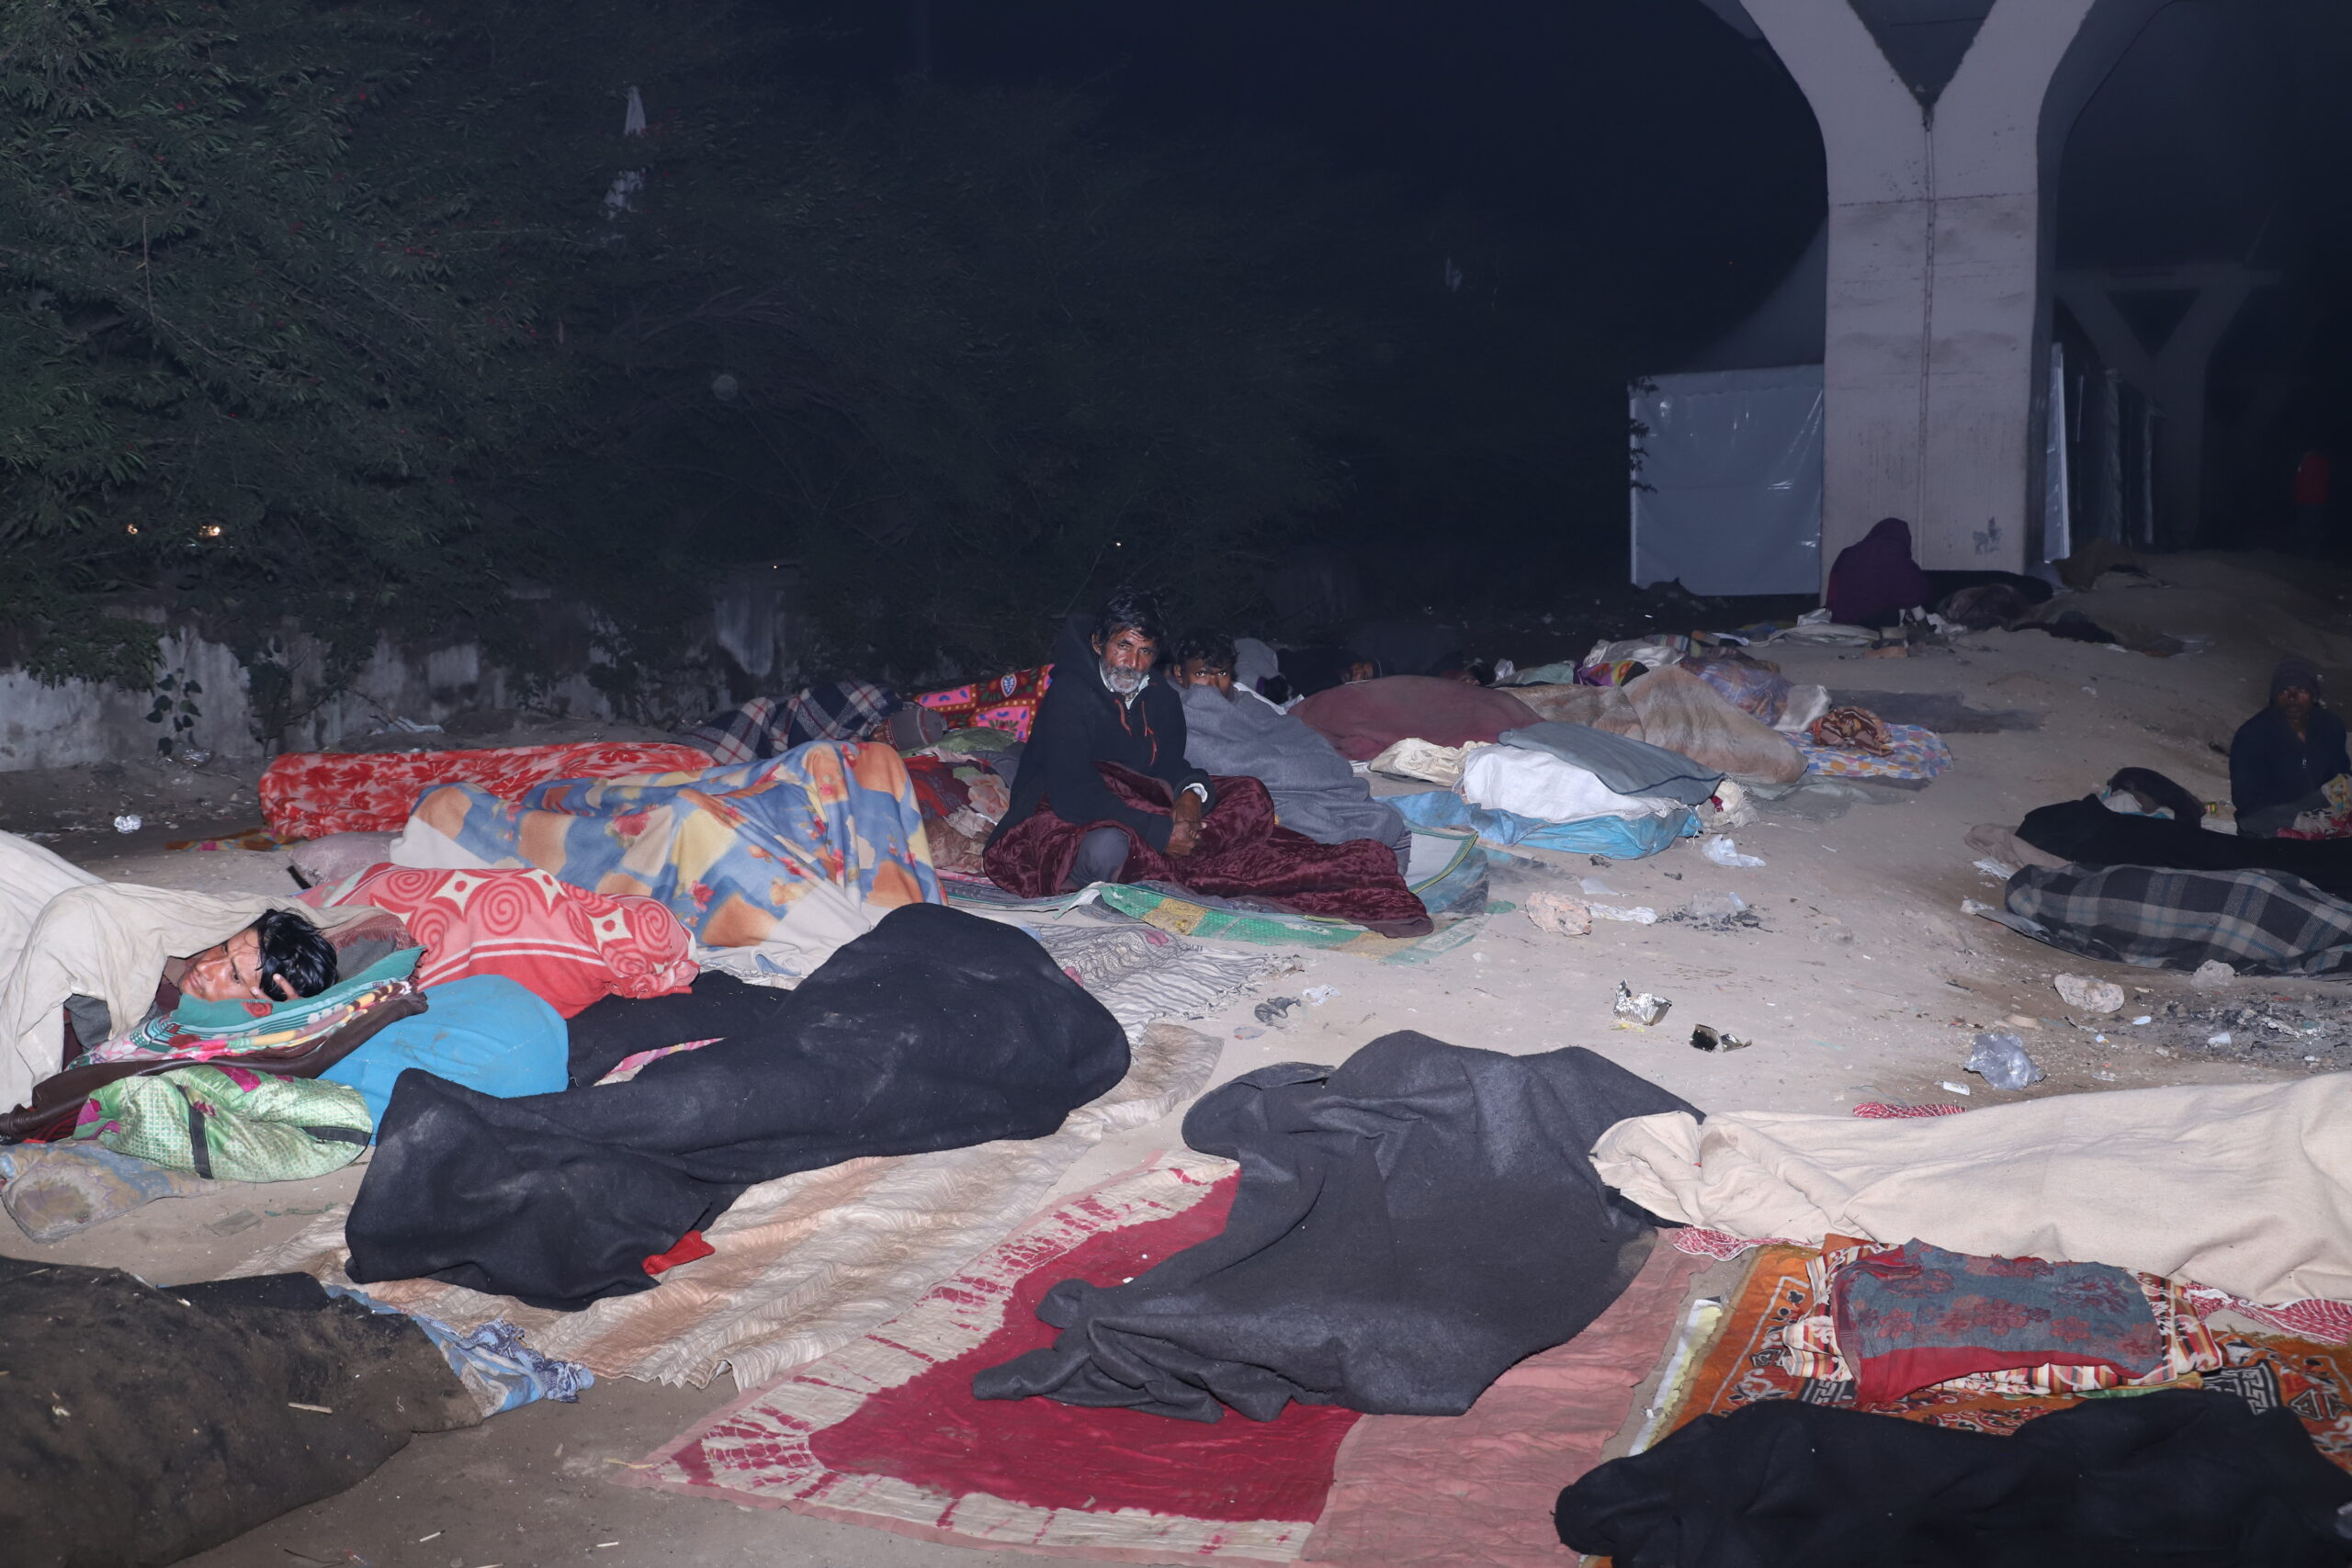 Severe cold & poor facilities responsible for homeless deaths: CHD